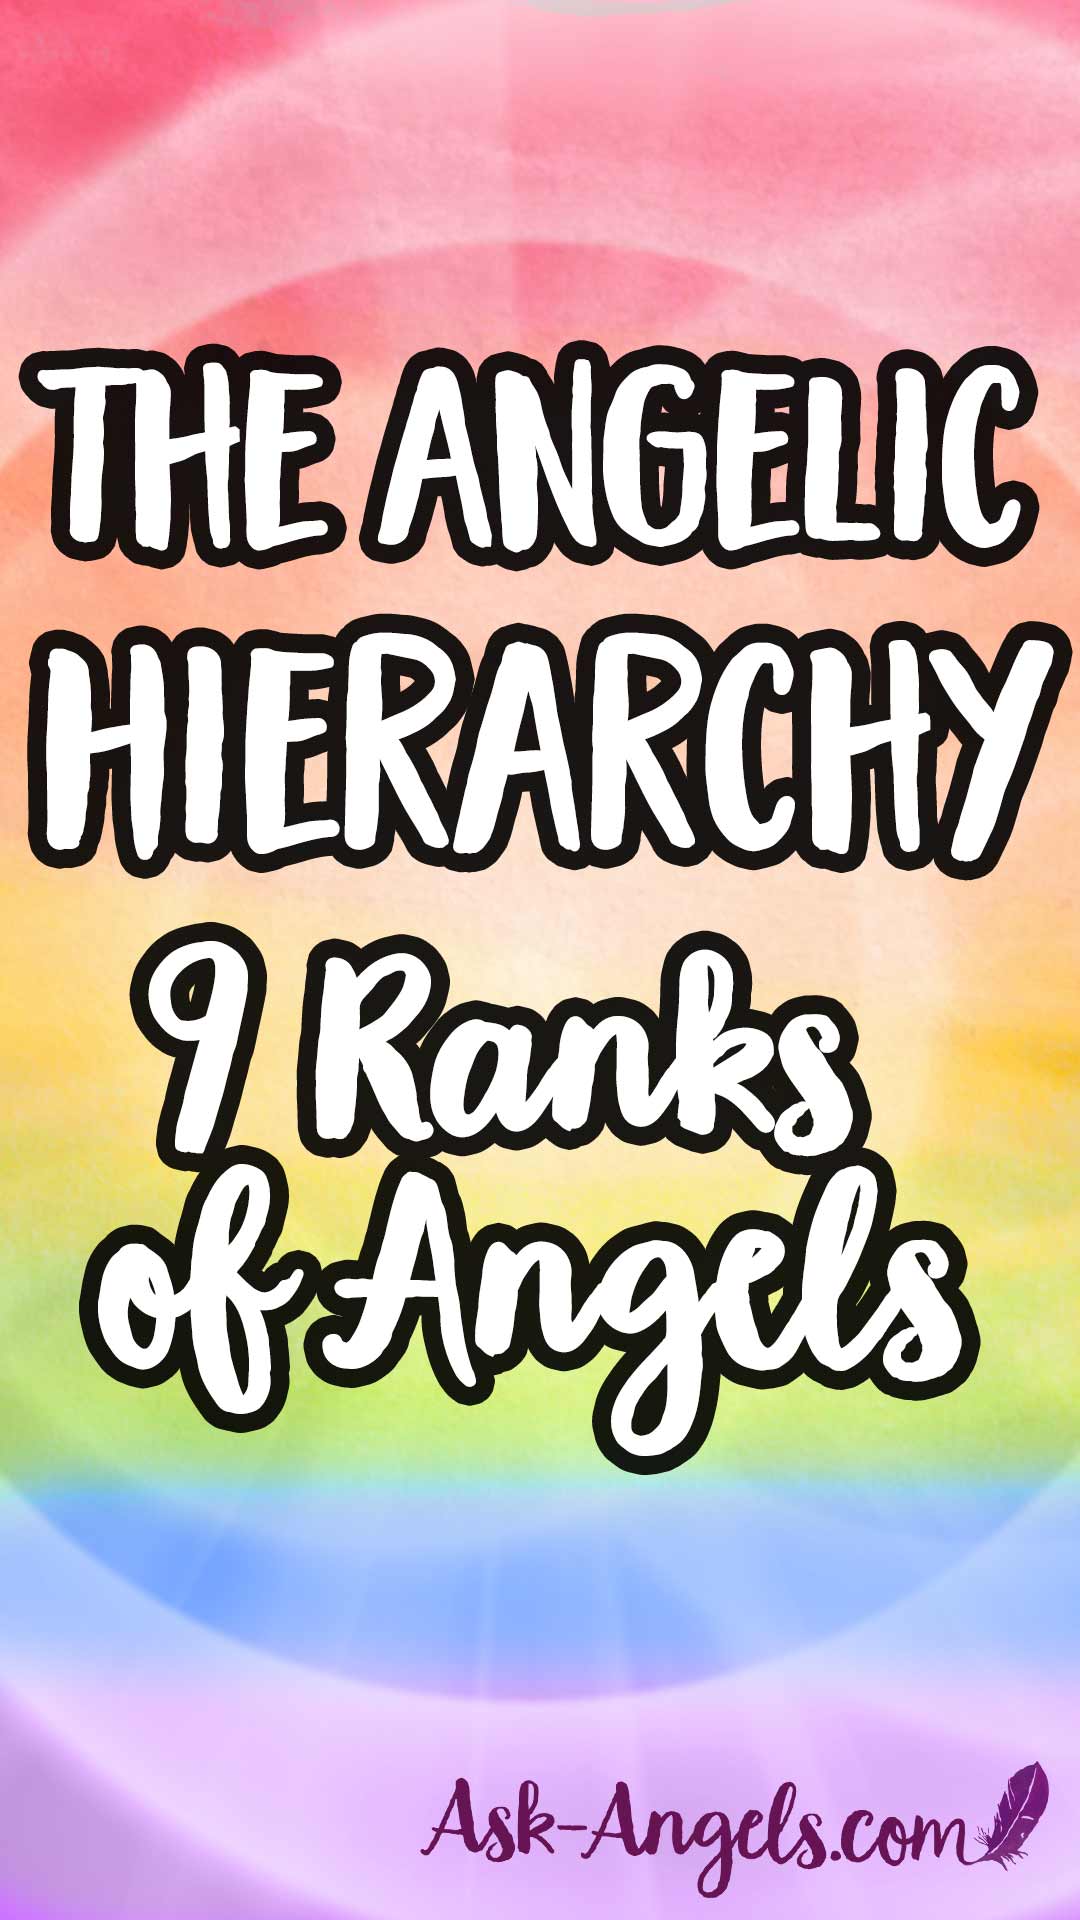 The Angelic Hierarchy... 9 Angel Ranks